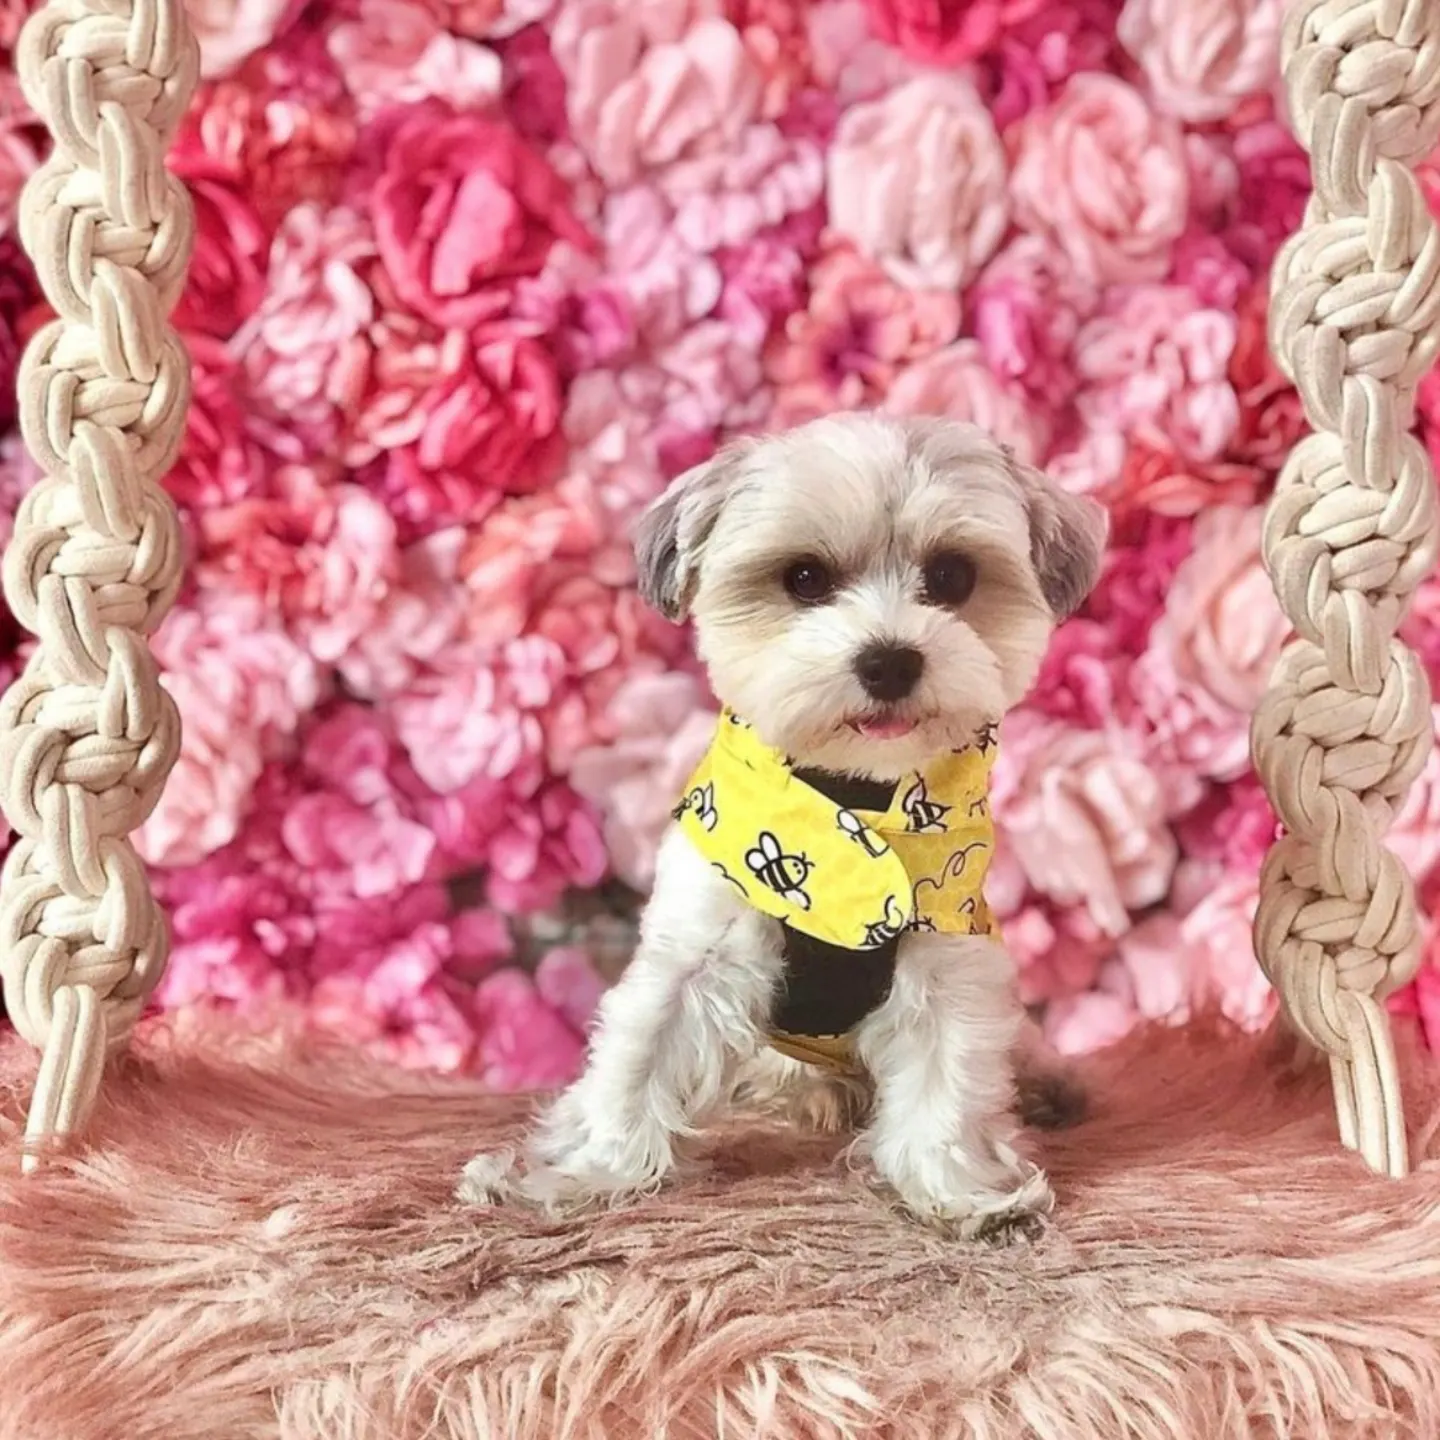 An adorable dog in front of flowers 